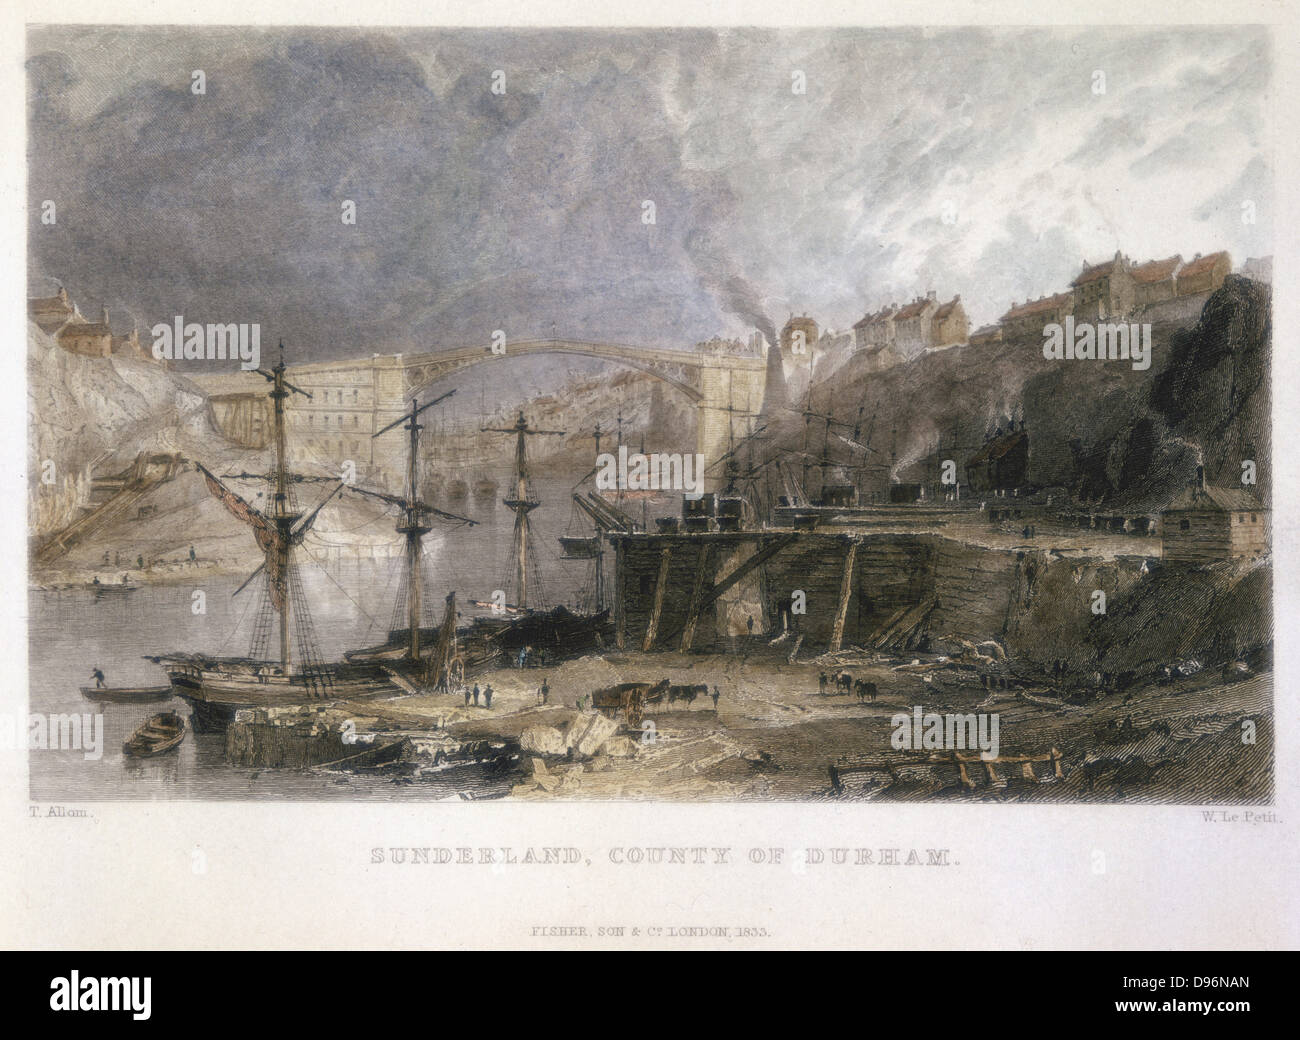 View of Sunderland the Iron Bridge across the Tyne at Wearmouth looking eastwards. Opened on 9 August 1796  it was a single span of 236 feet (71.9 metre). Hand-coloured print dated 1835. Stock Photo